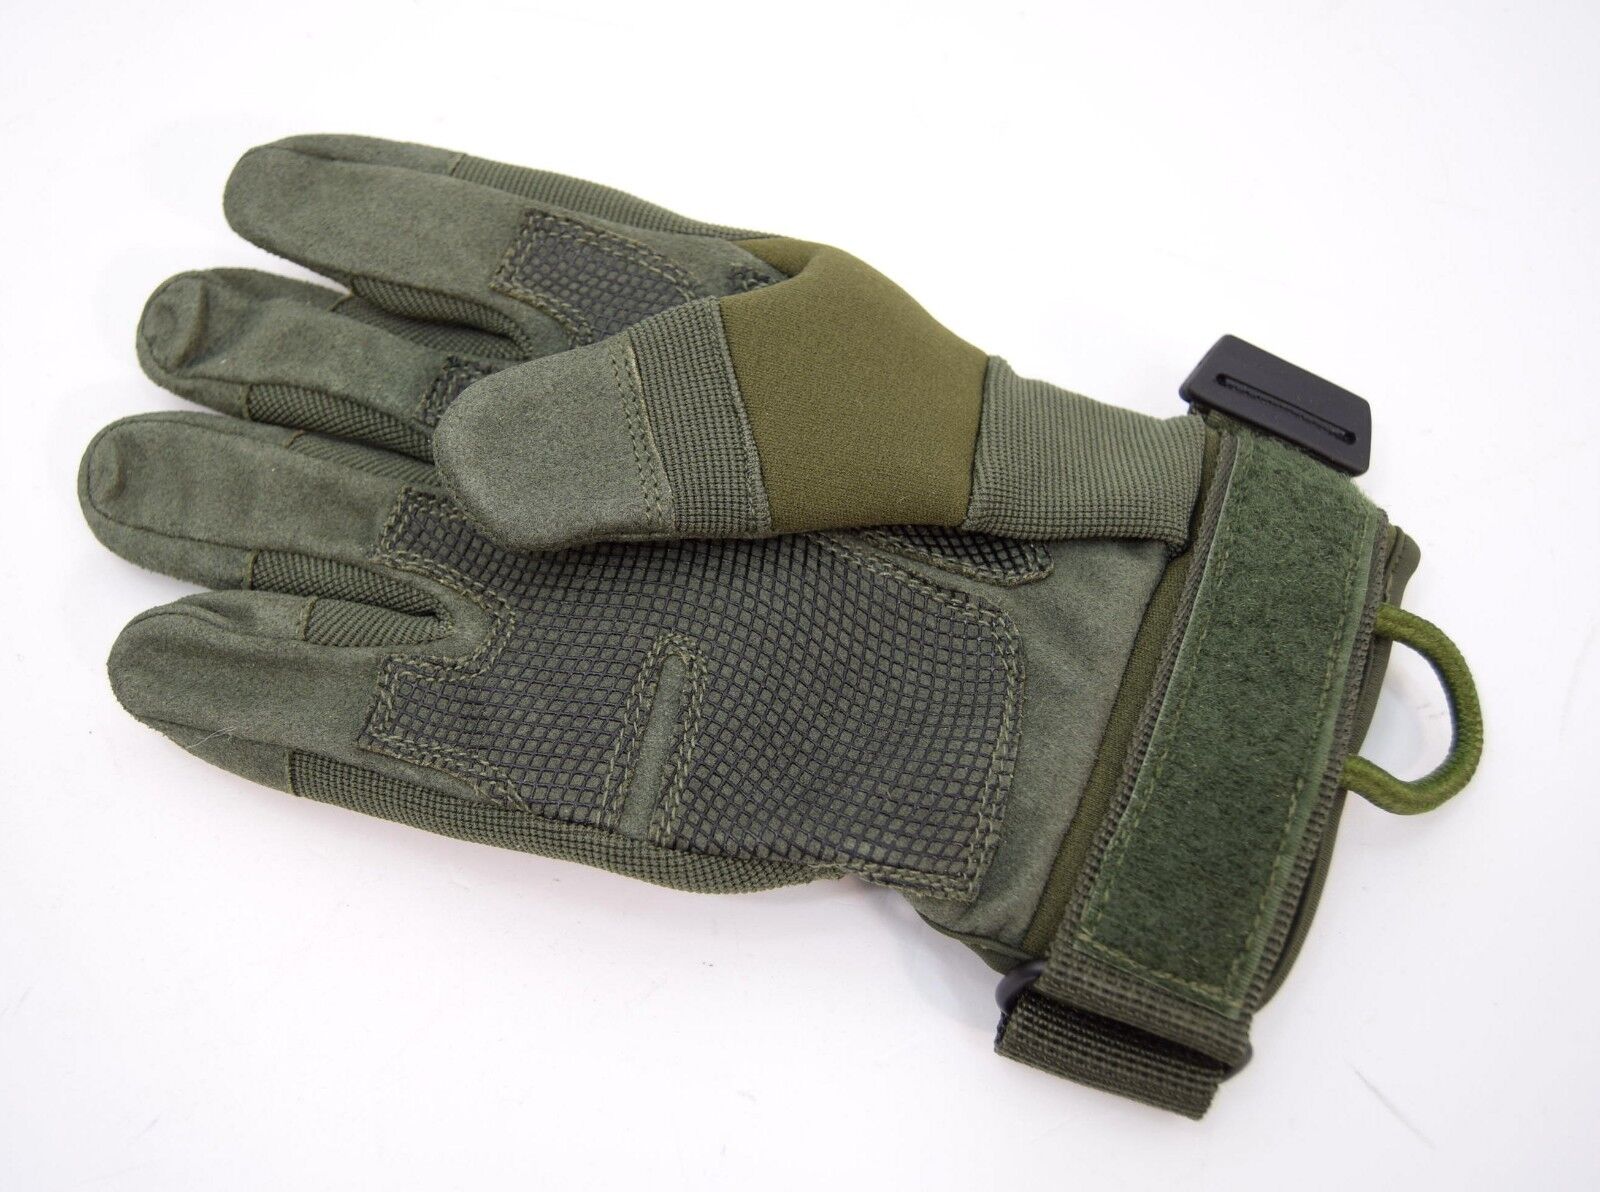 US Army Tactical Hard Knuckle Gloves Sage Green Combat Leather Protective Glove